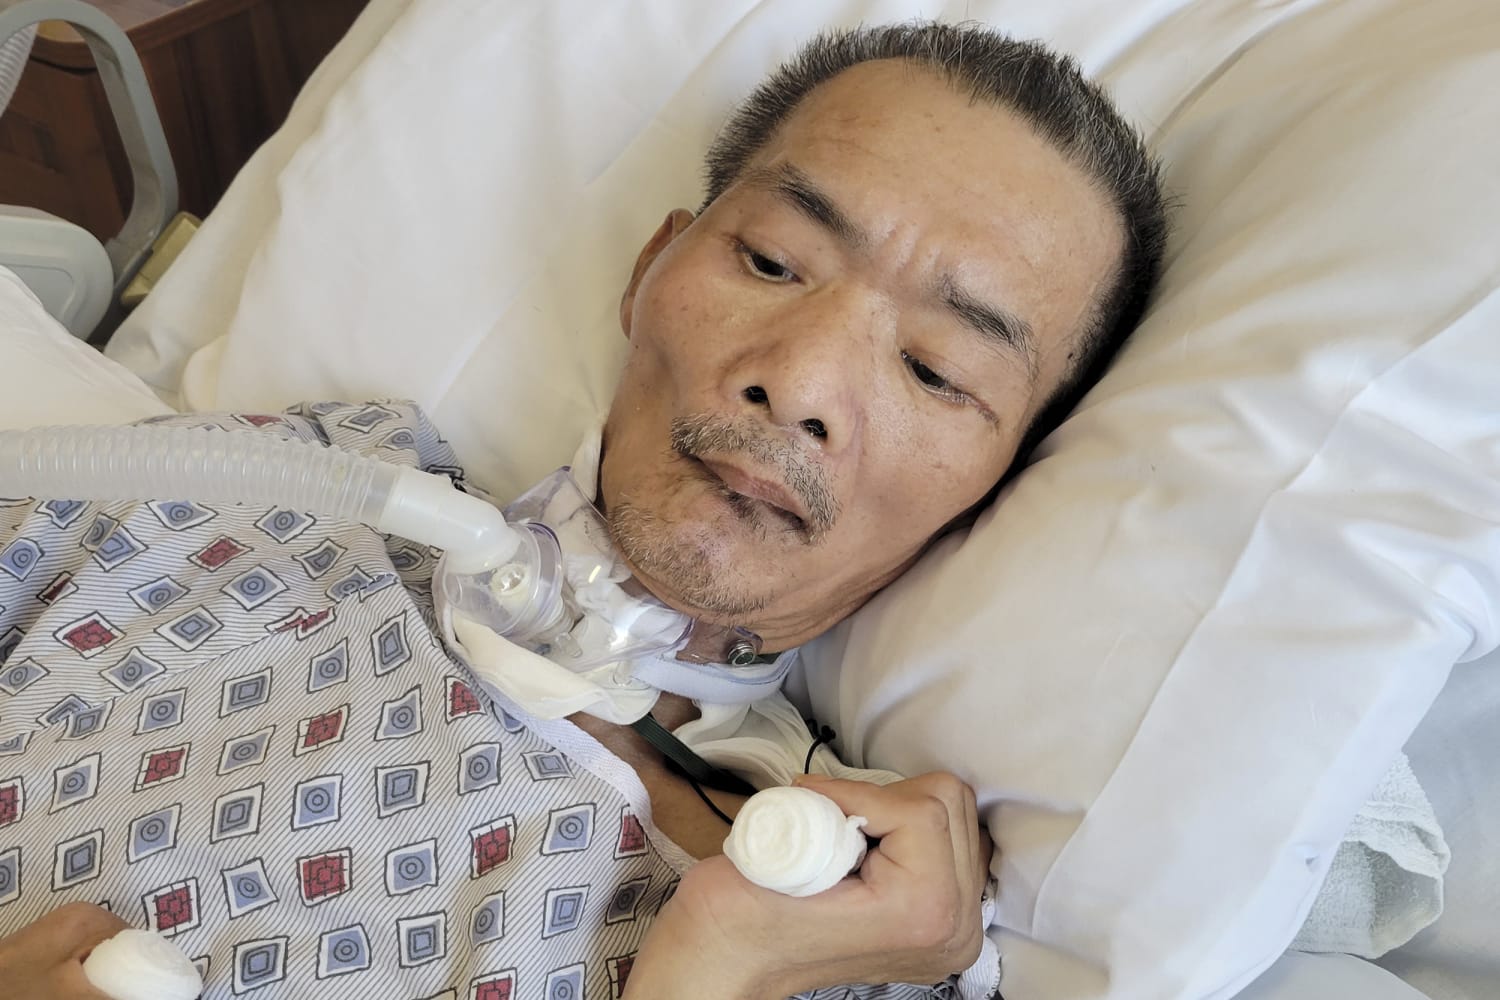 61-year-old Asian man head stomped in brutal NYC attack dies 8 months later